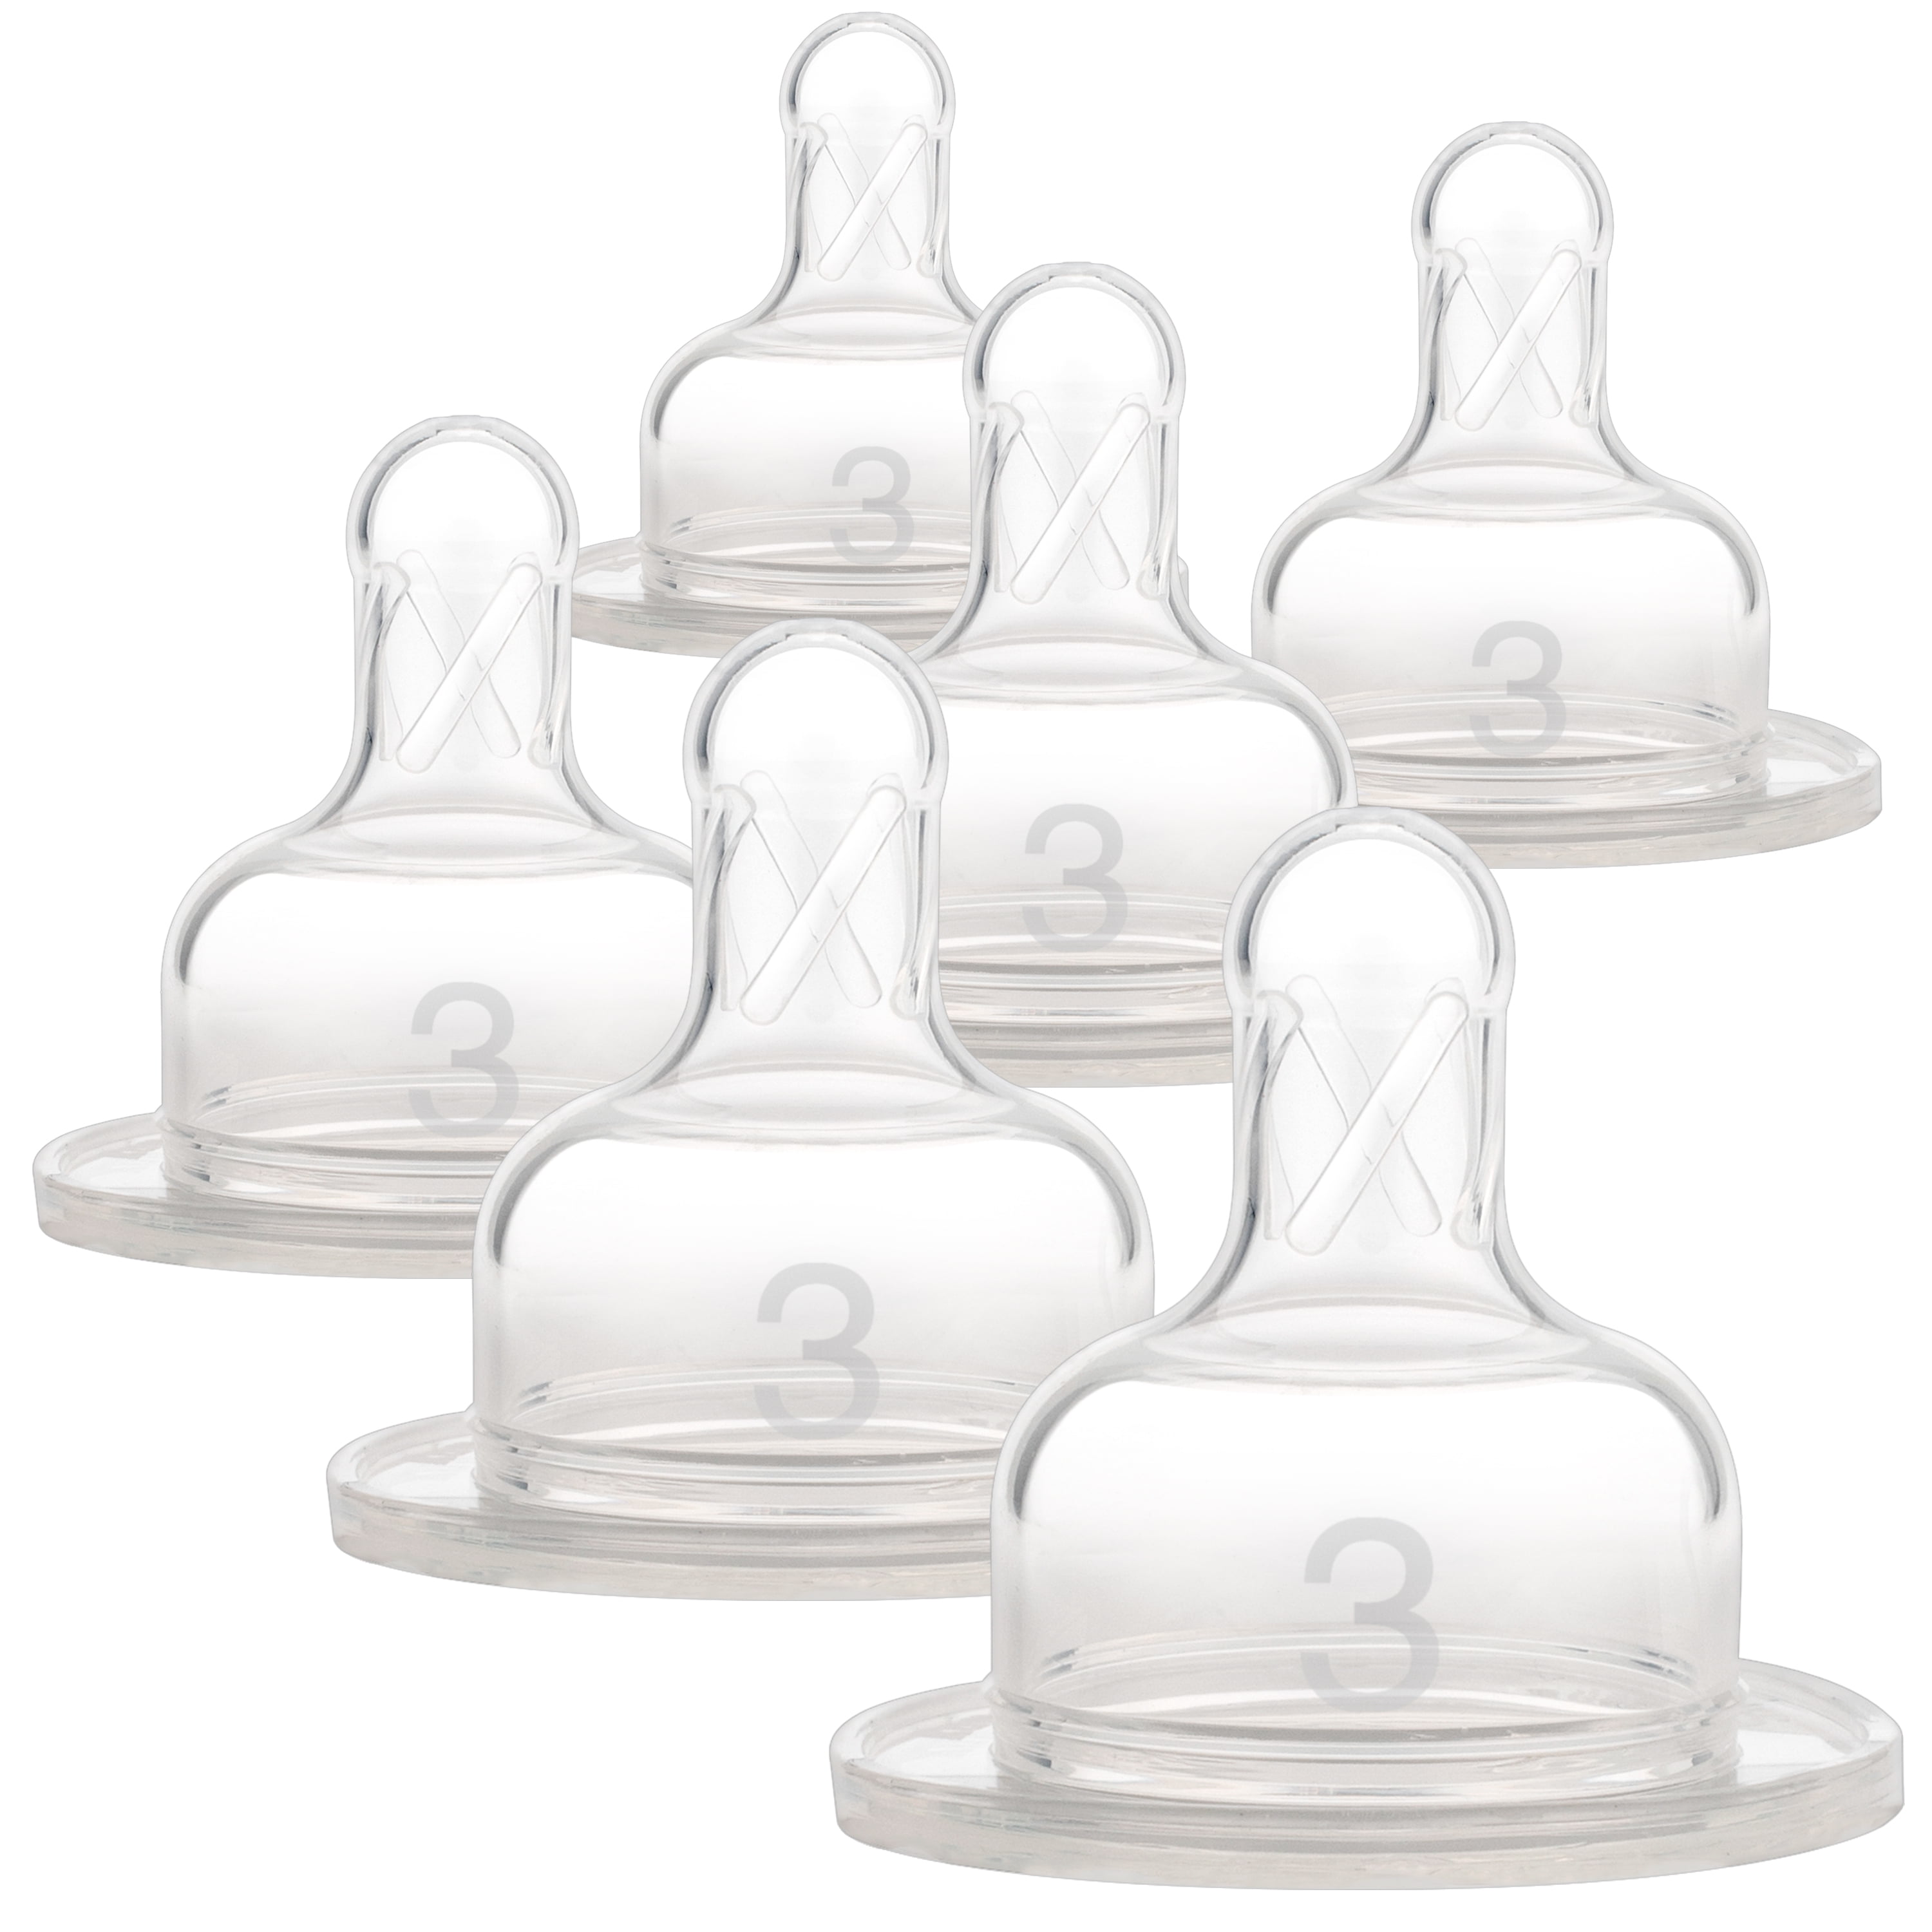 Dr. Brown's Natural Flow Level 3 Wide-Neck Baby Bottle Silicone Nipple,  Medium-Fast Flow, 6m+, 6-pack 